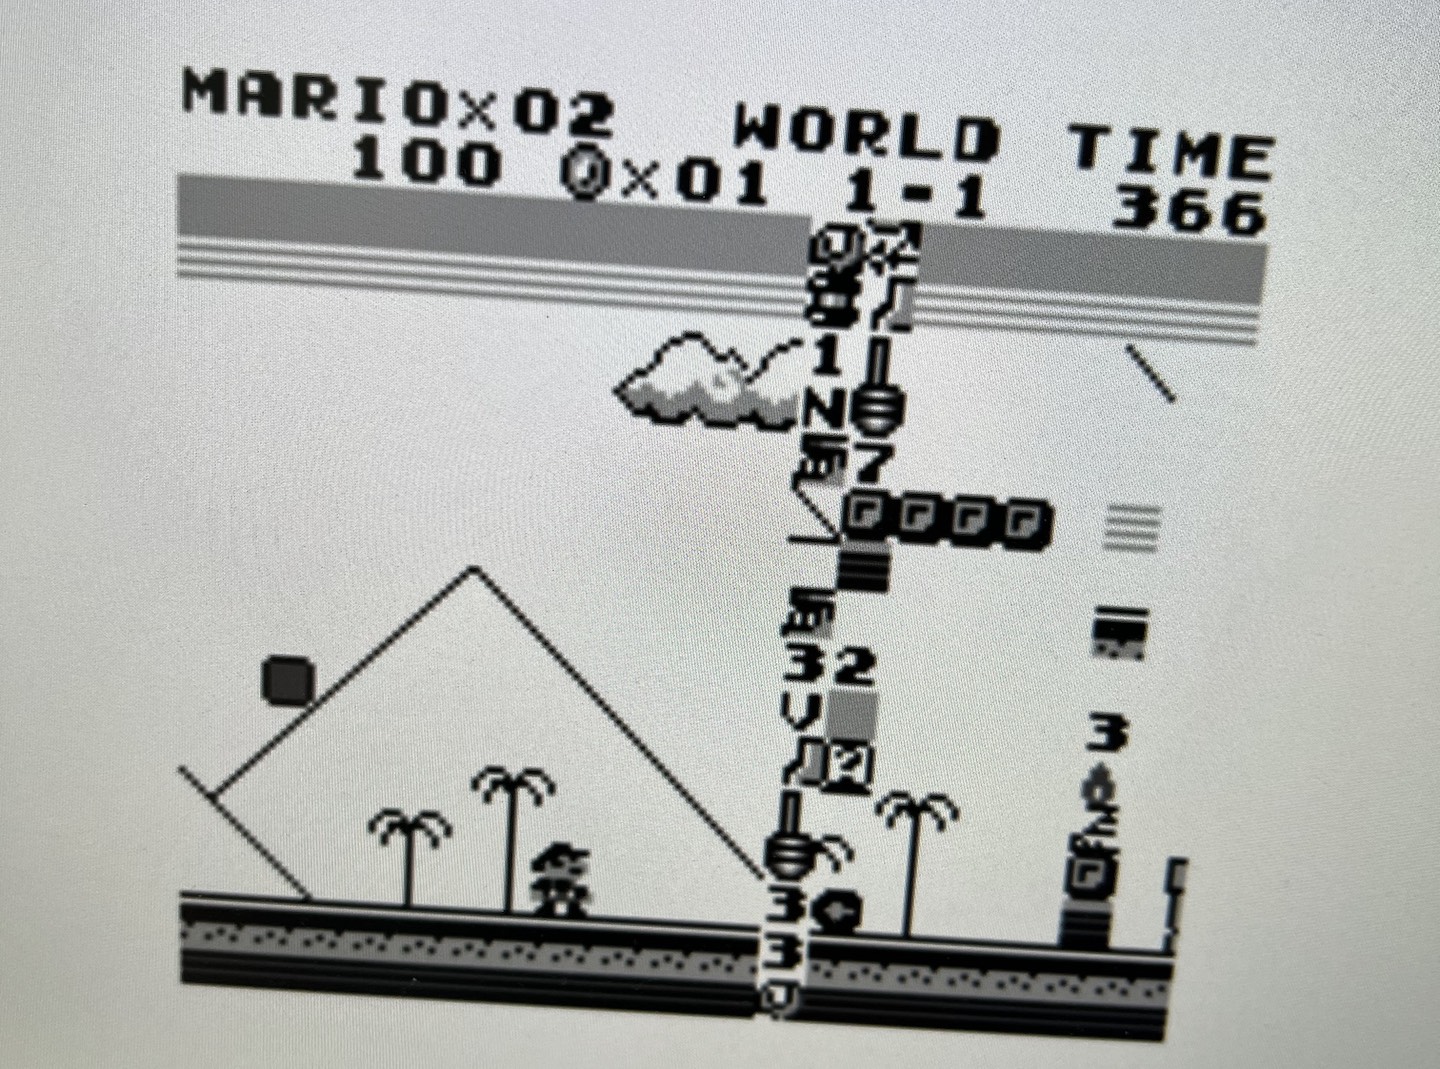 Mario facing an impassible wall of glitched tiles